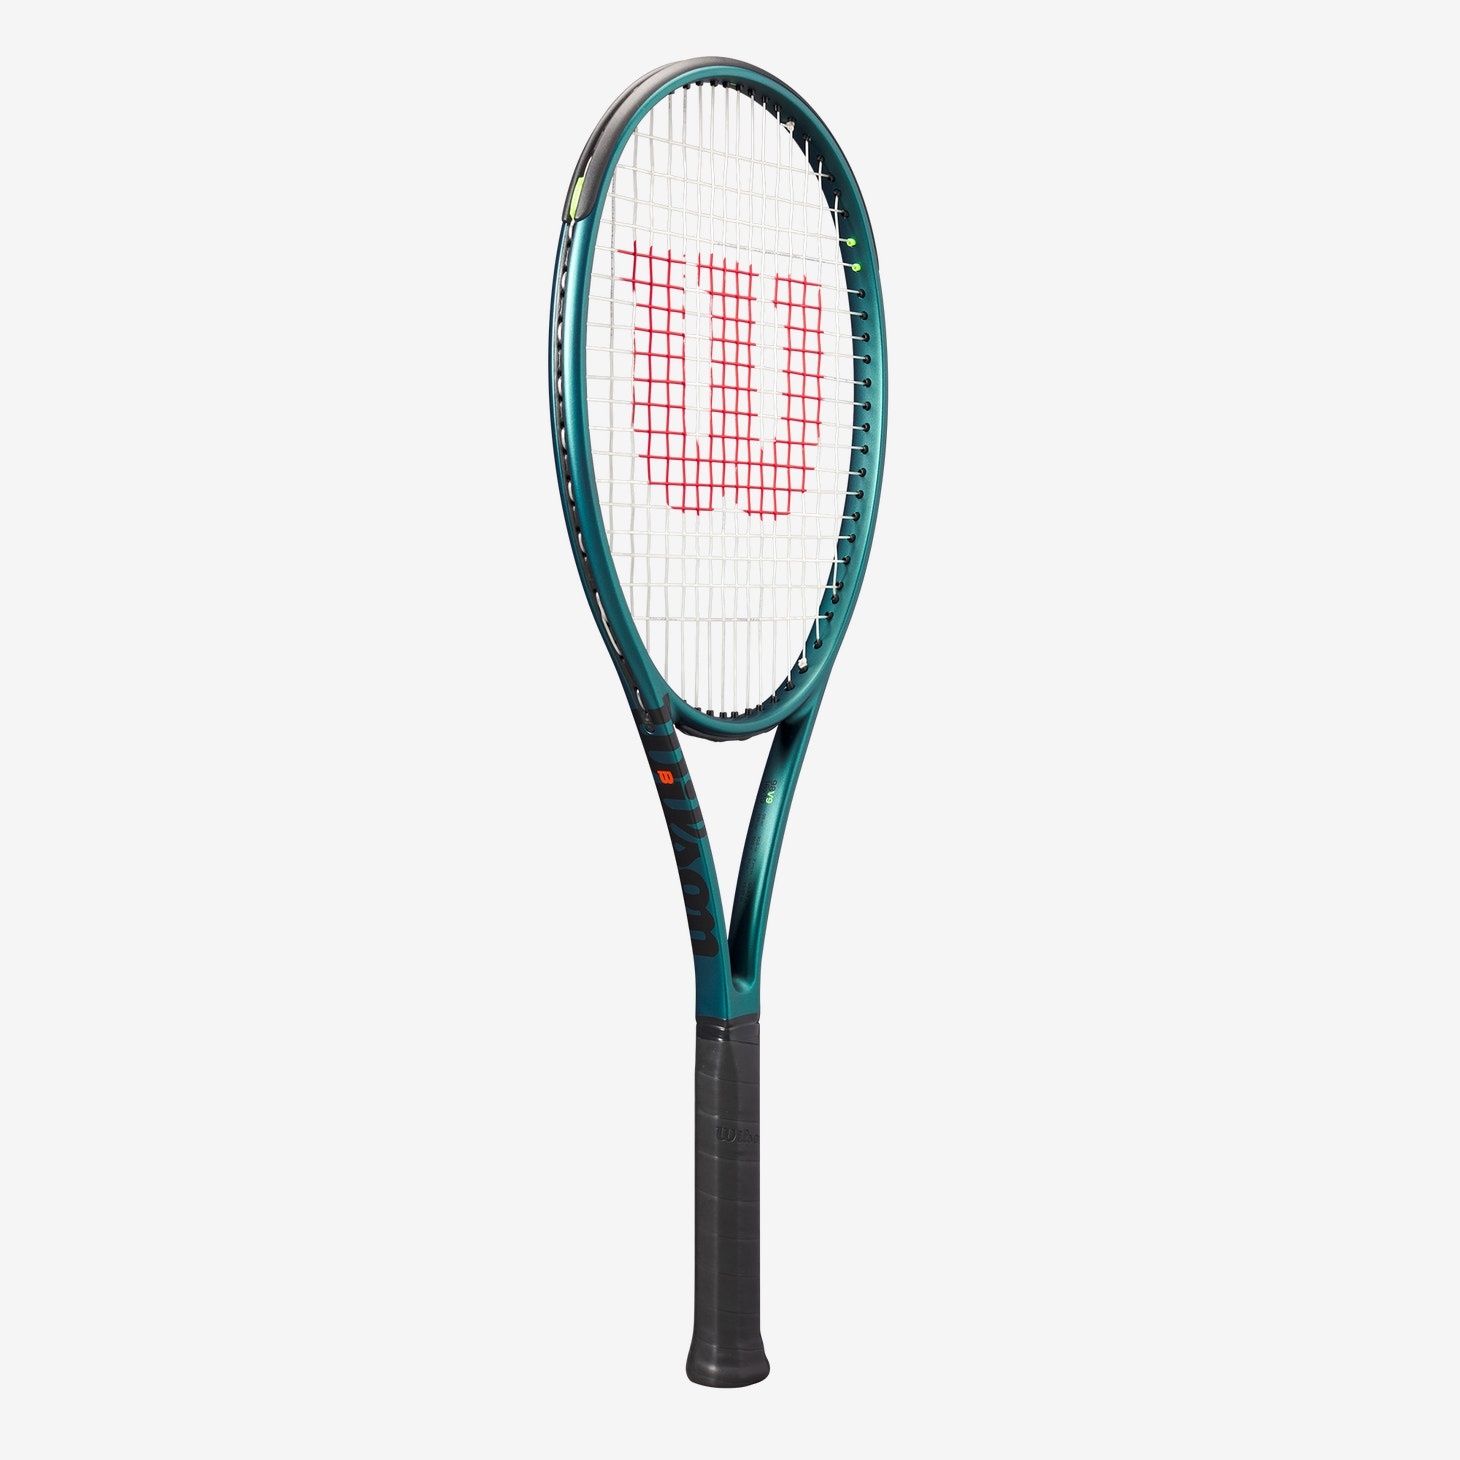 Blade 98 16x19 V9.0 - Tennis Topia - Best Sale Prices and Service 